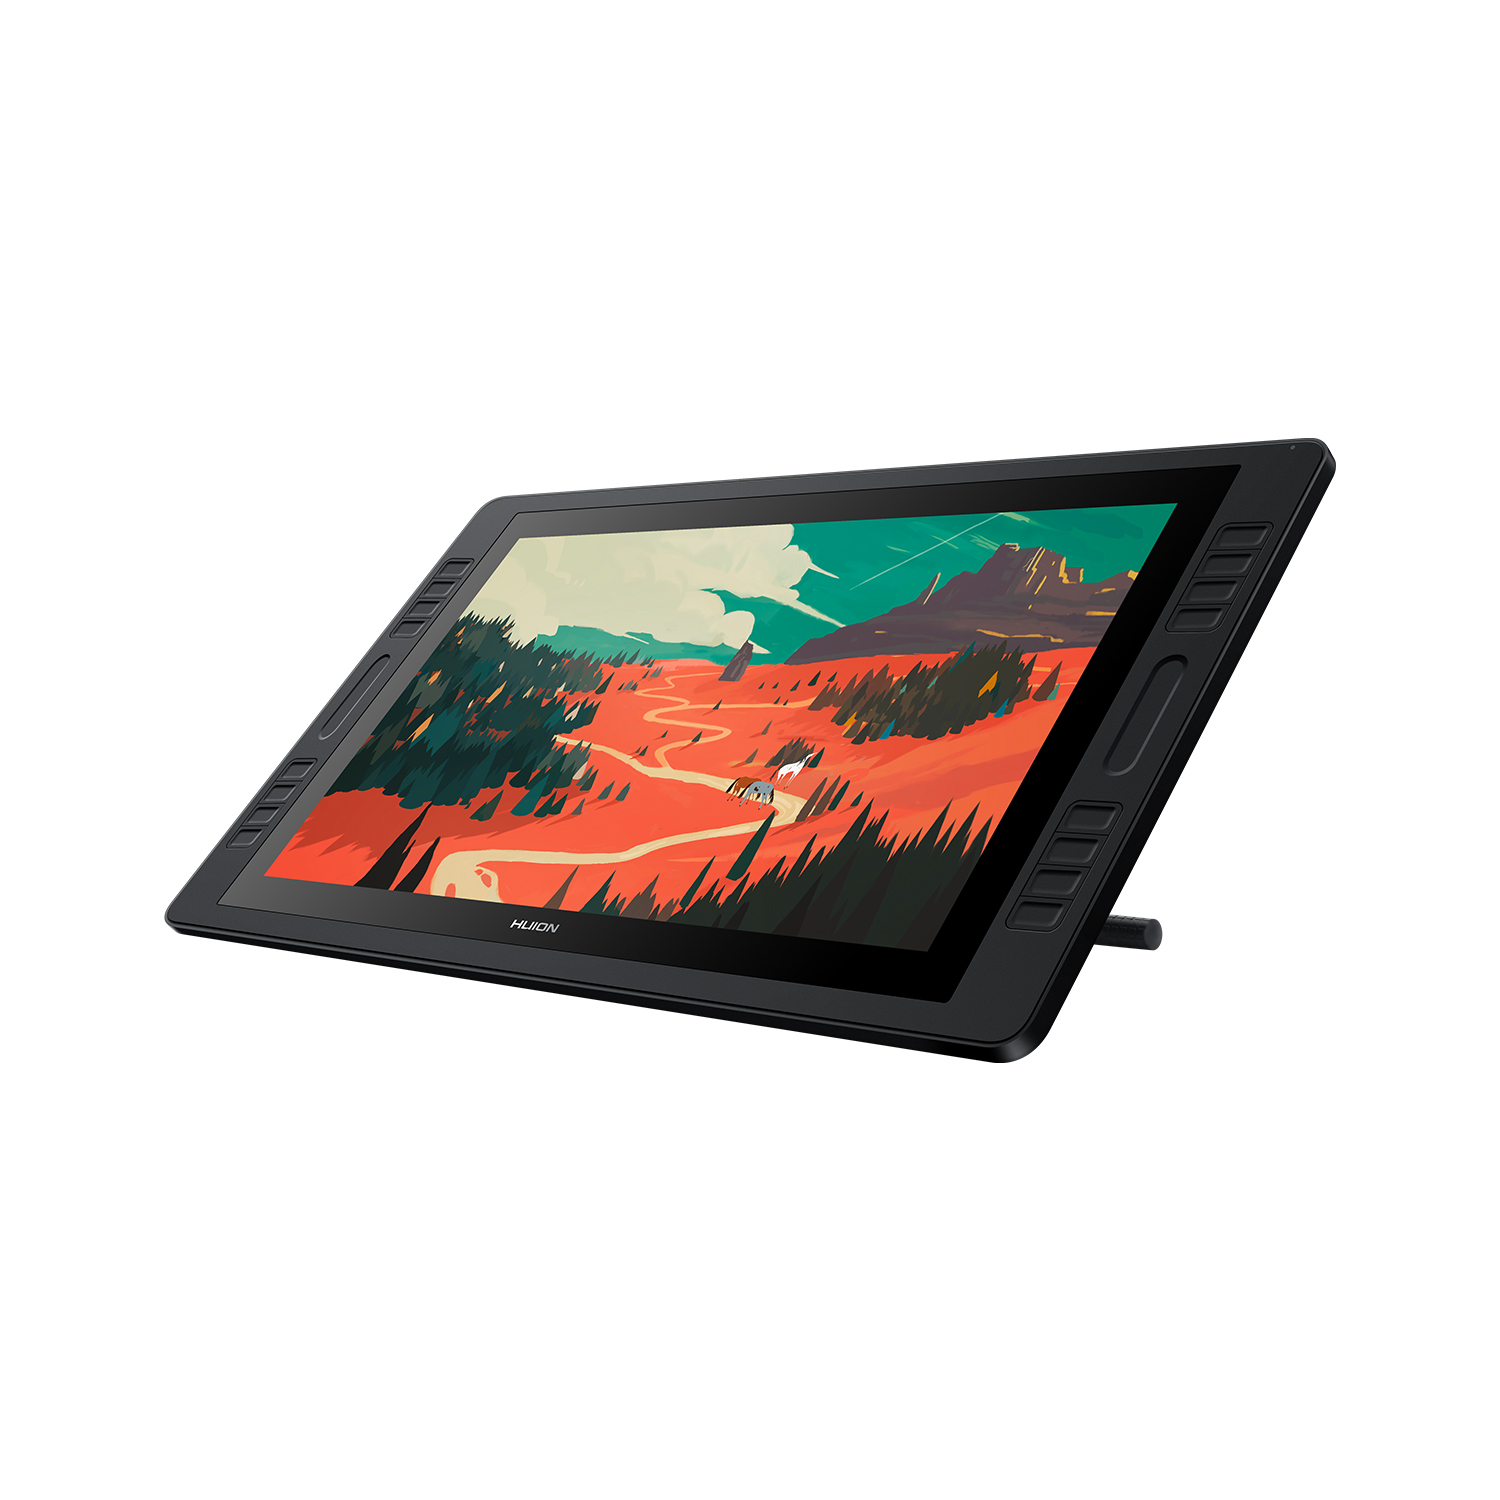 Kamvas Pro 20 (2019) 19.1-inch Graphic Monitor | Huion Official 